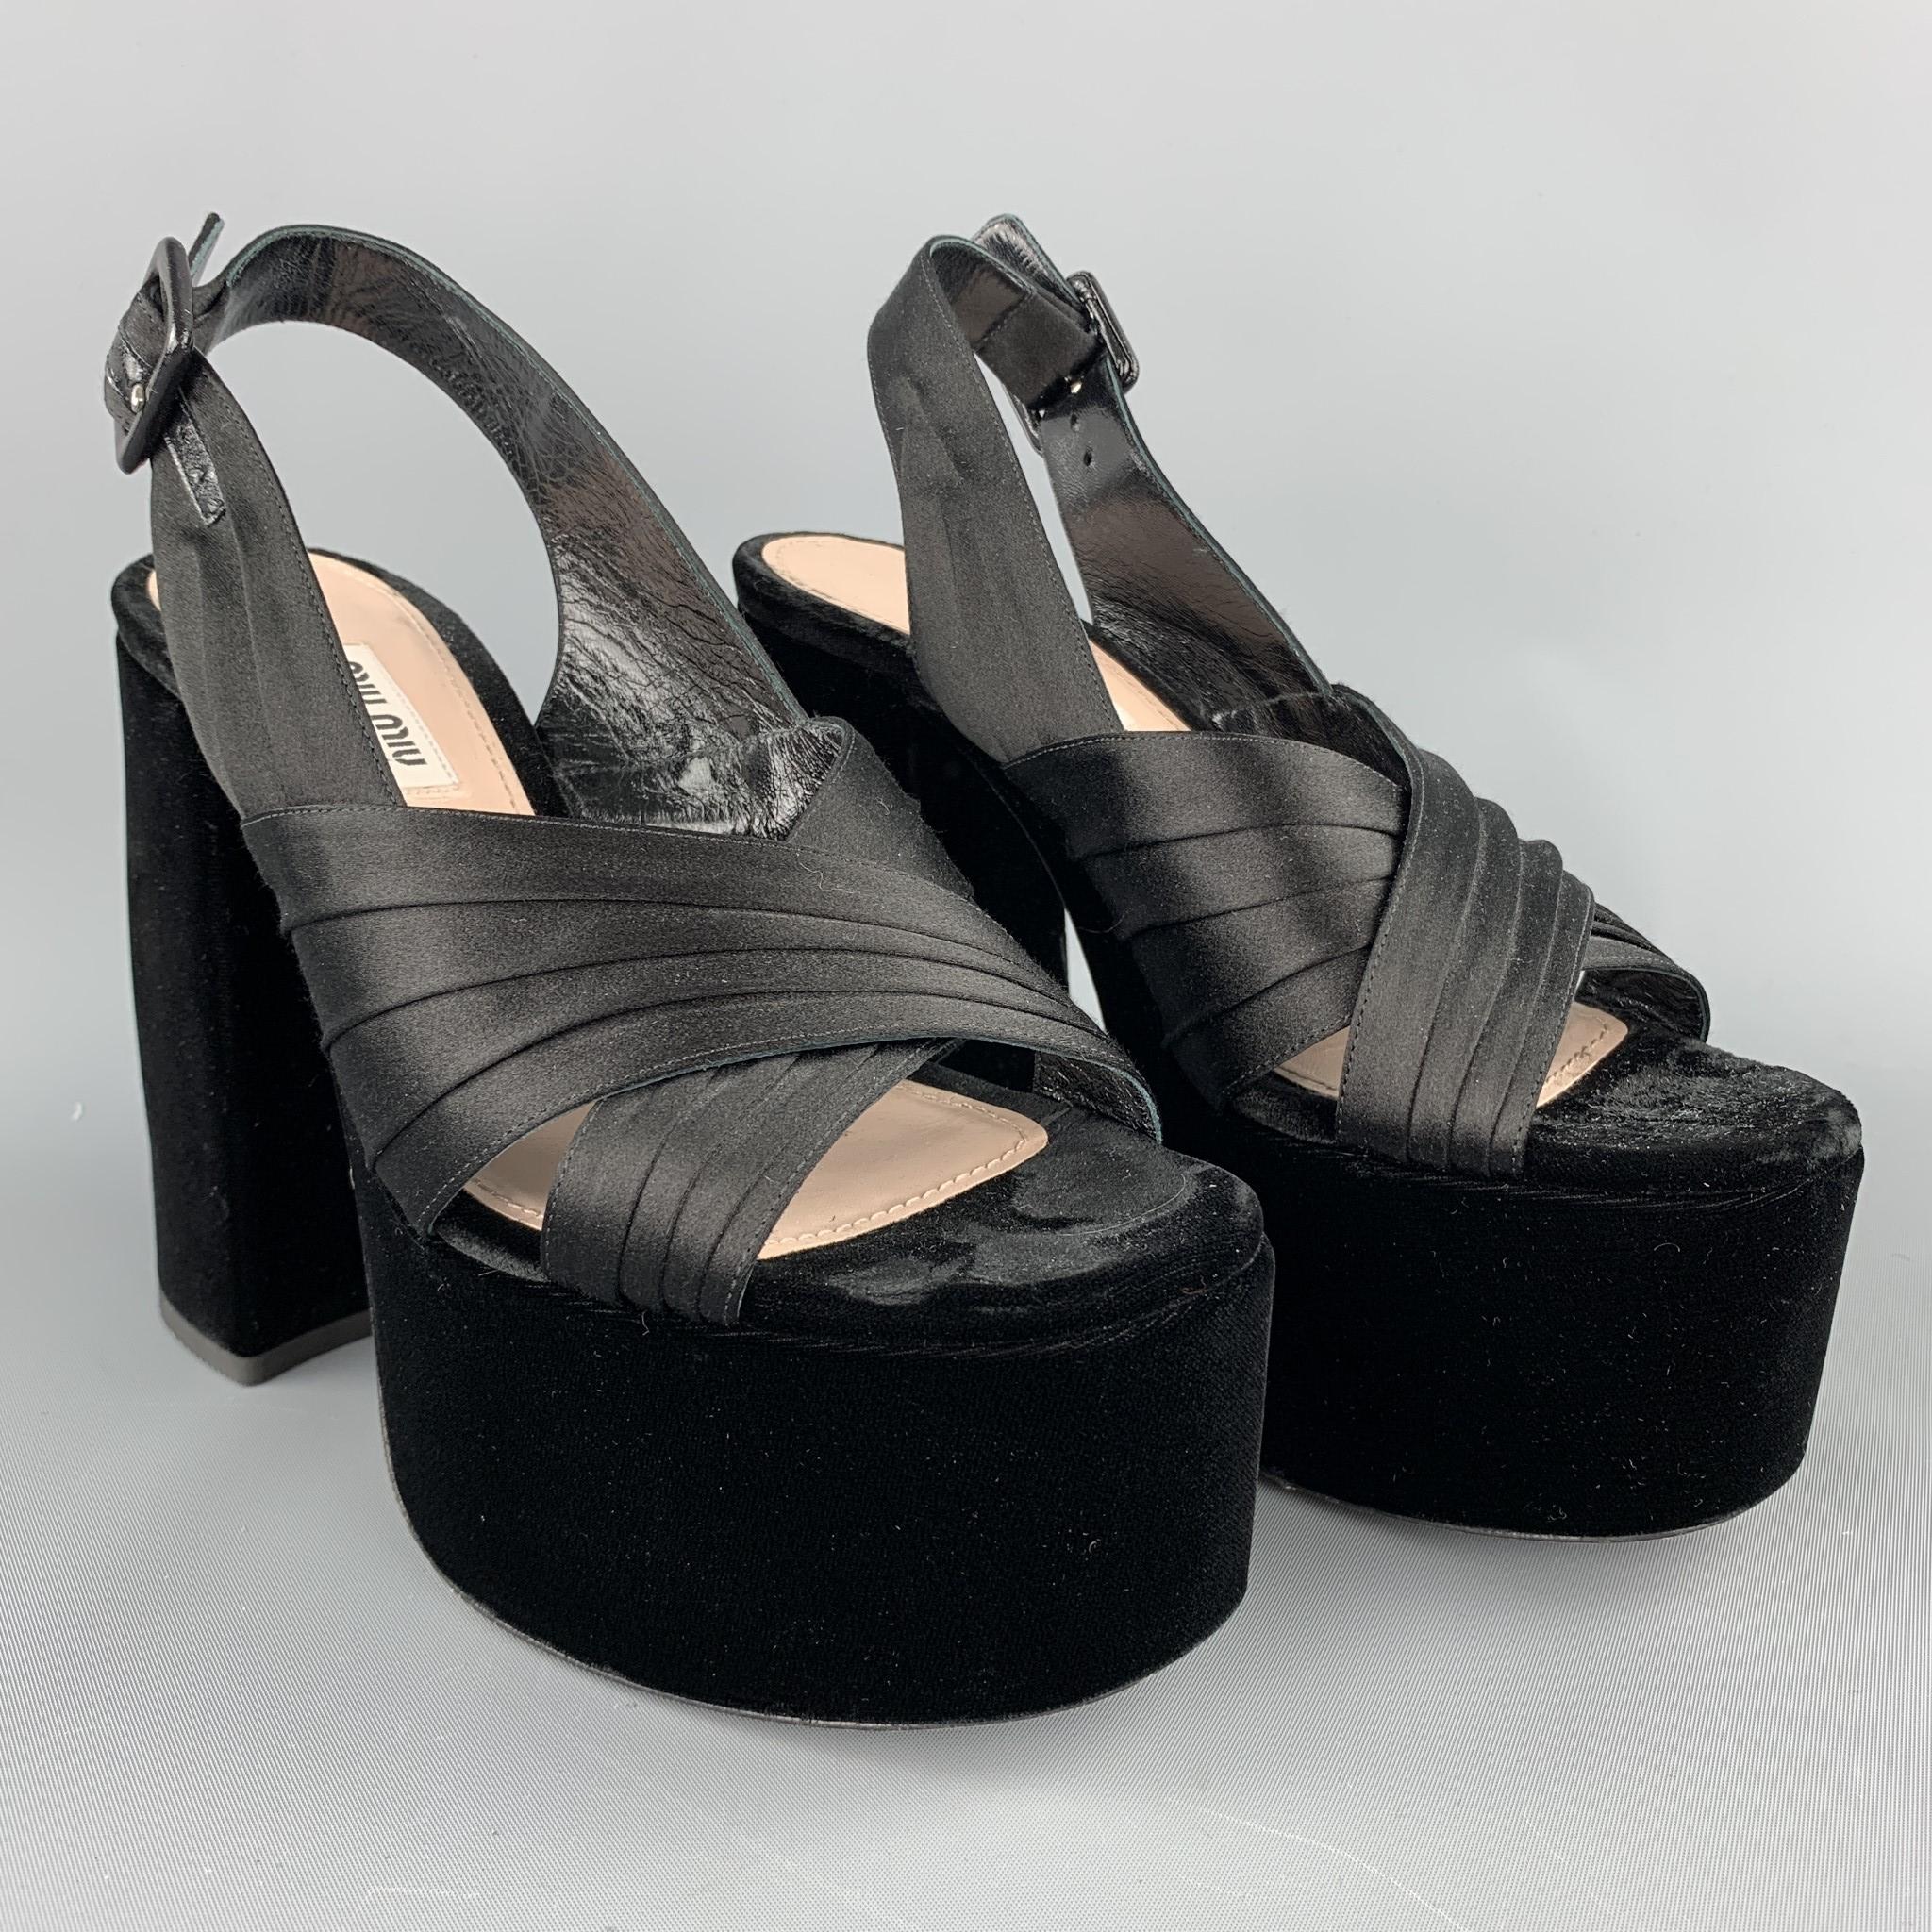 MIU MIU sandals comes black velvet featuring a platform style, chunky heel, and a belt buckle closure. Made in Italy.

Very Good Pre-Owned Condition.
Marked: EU 38
Original Retail Price: $750.00

Measurements:

Heel: 5.5 in. 
Platform: 2.5 in. 